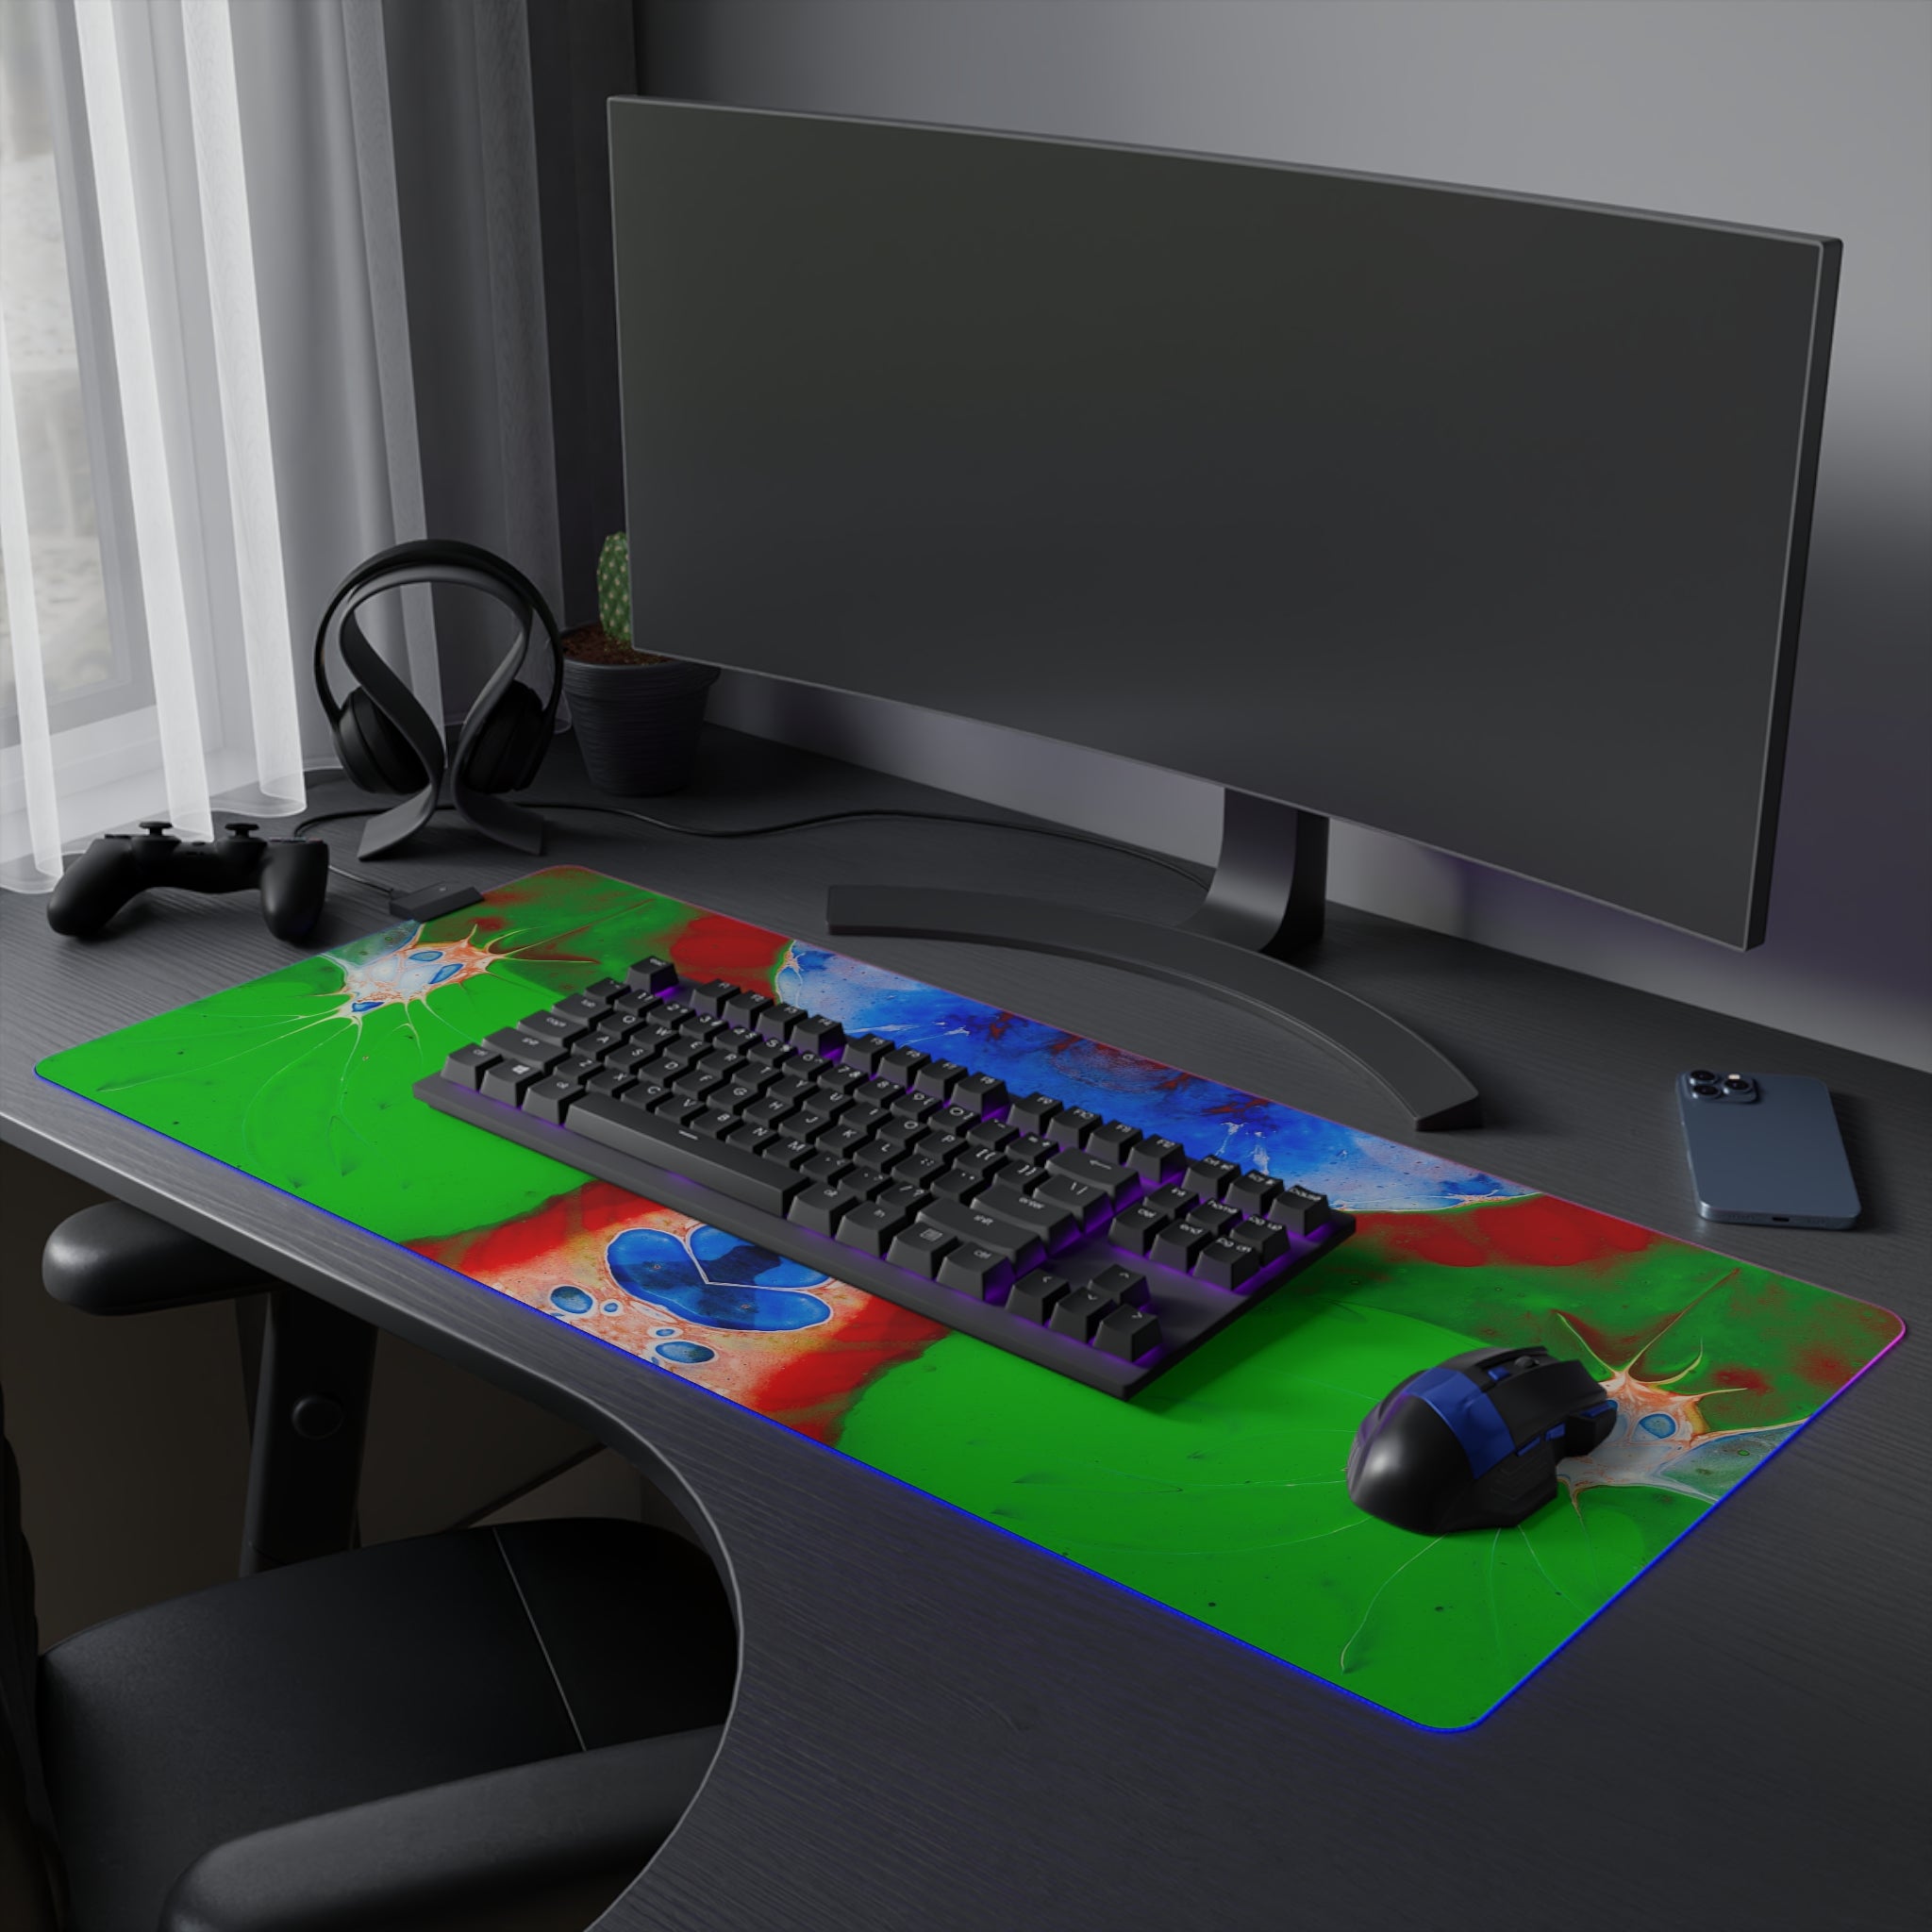 Cameron Creations - LED Gaming Mouse Pad - Green Goo - Concept 1